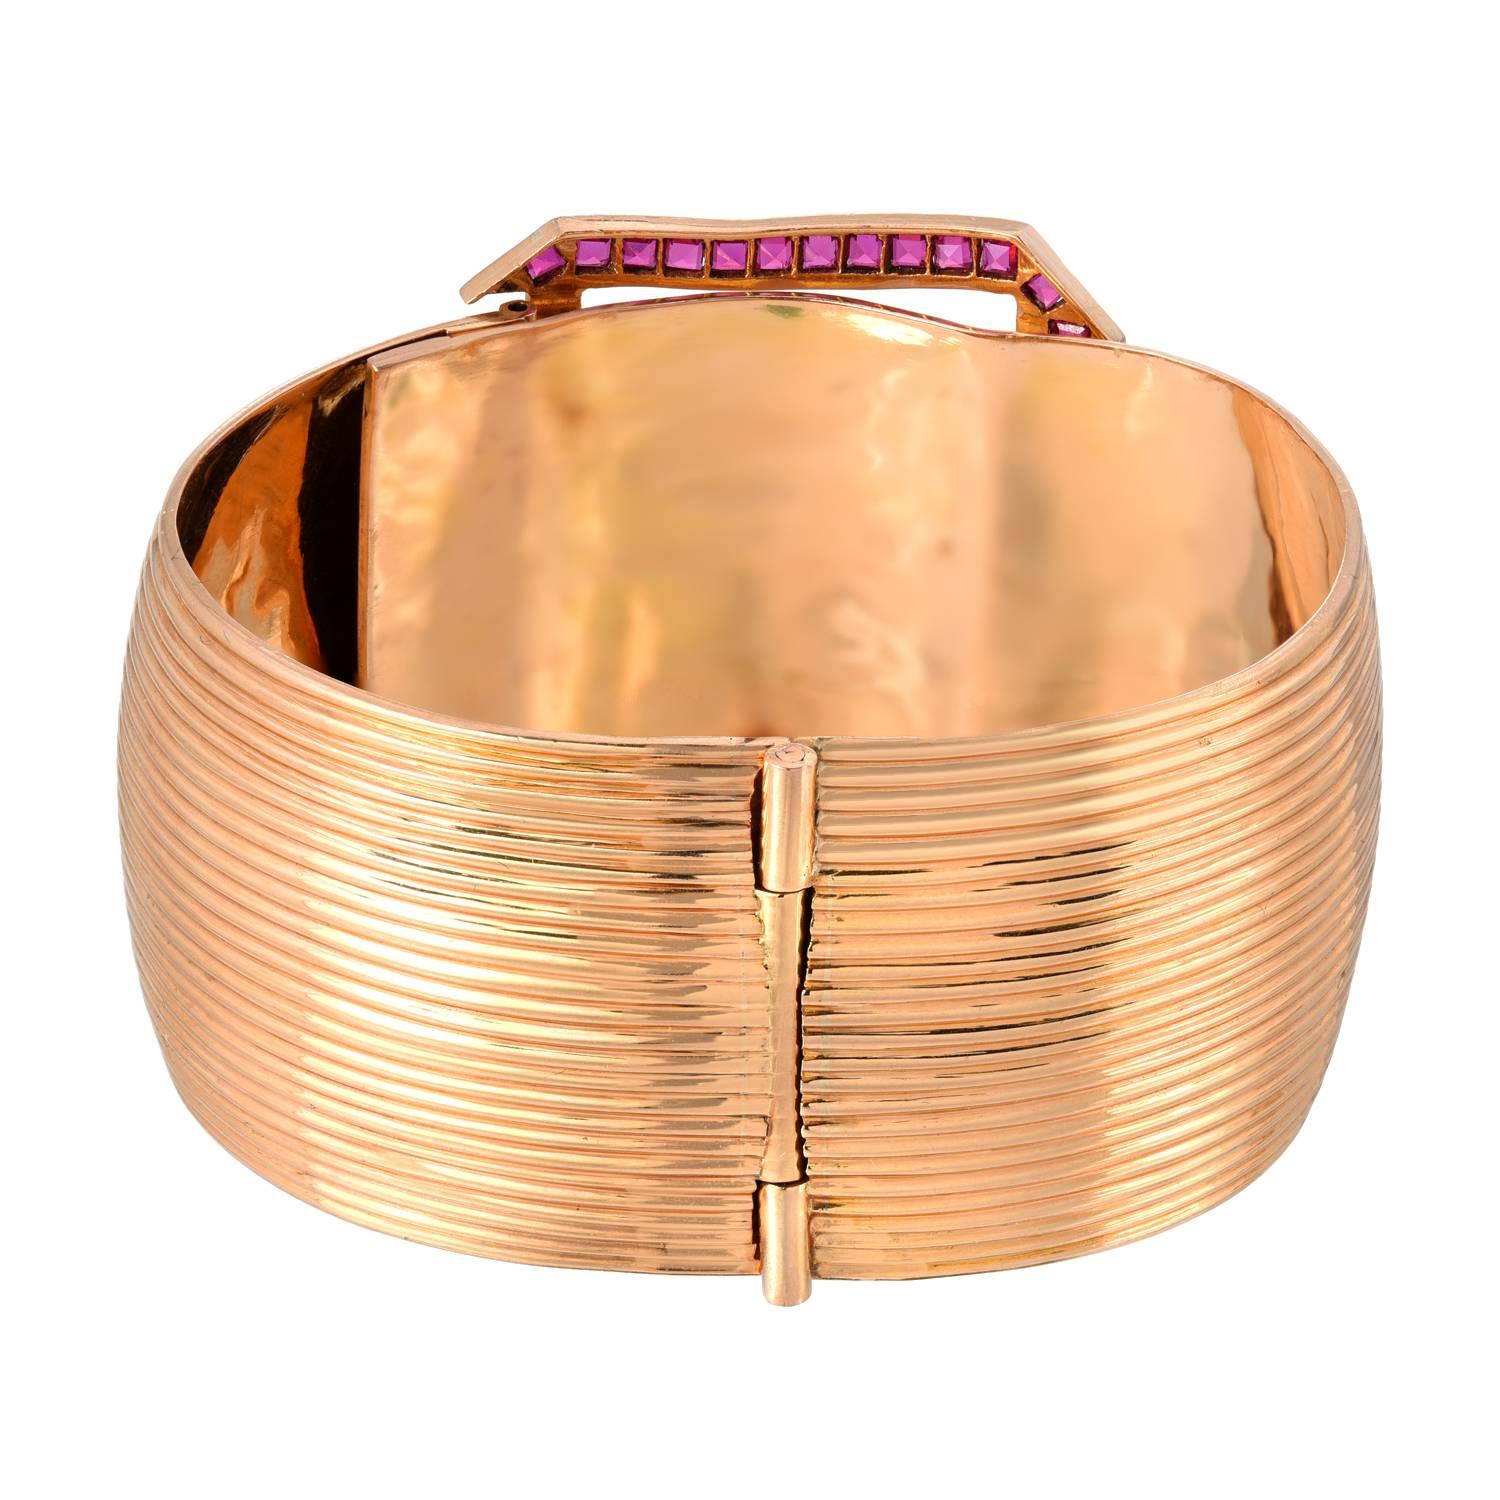  Retro Diamonds and Rubies Buckle  18K Pink Gold  Bangle   In Excellent Condition For Sale In New York, NY